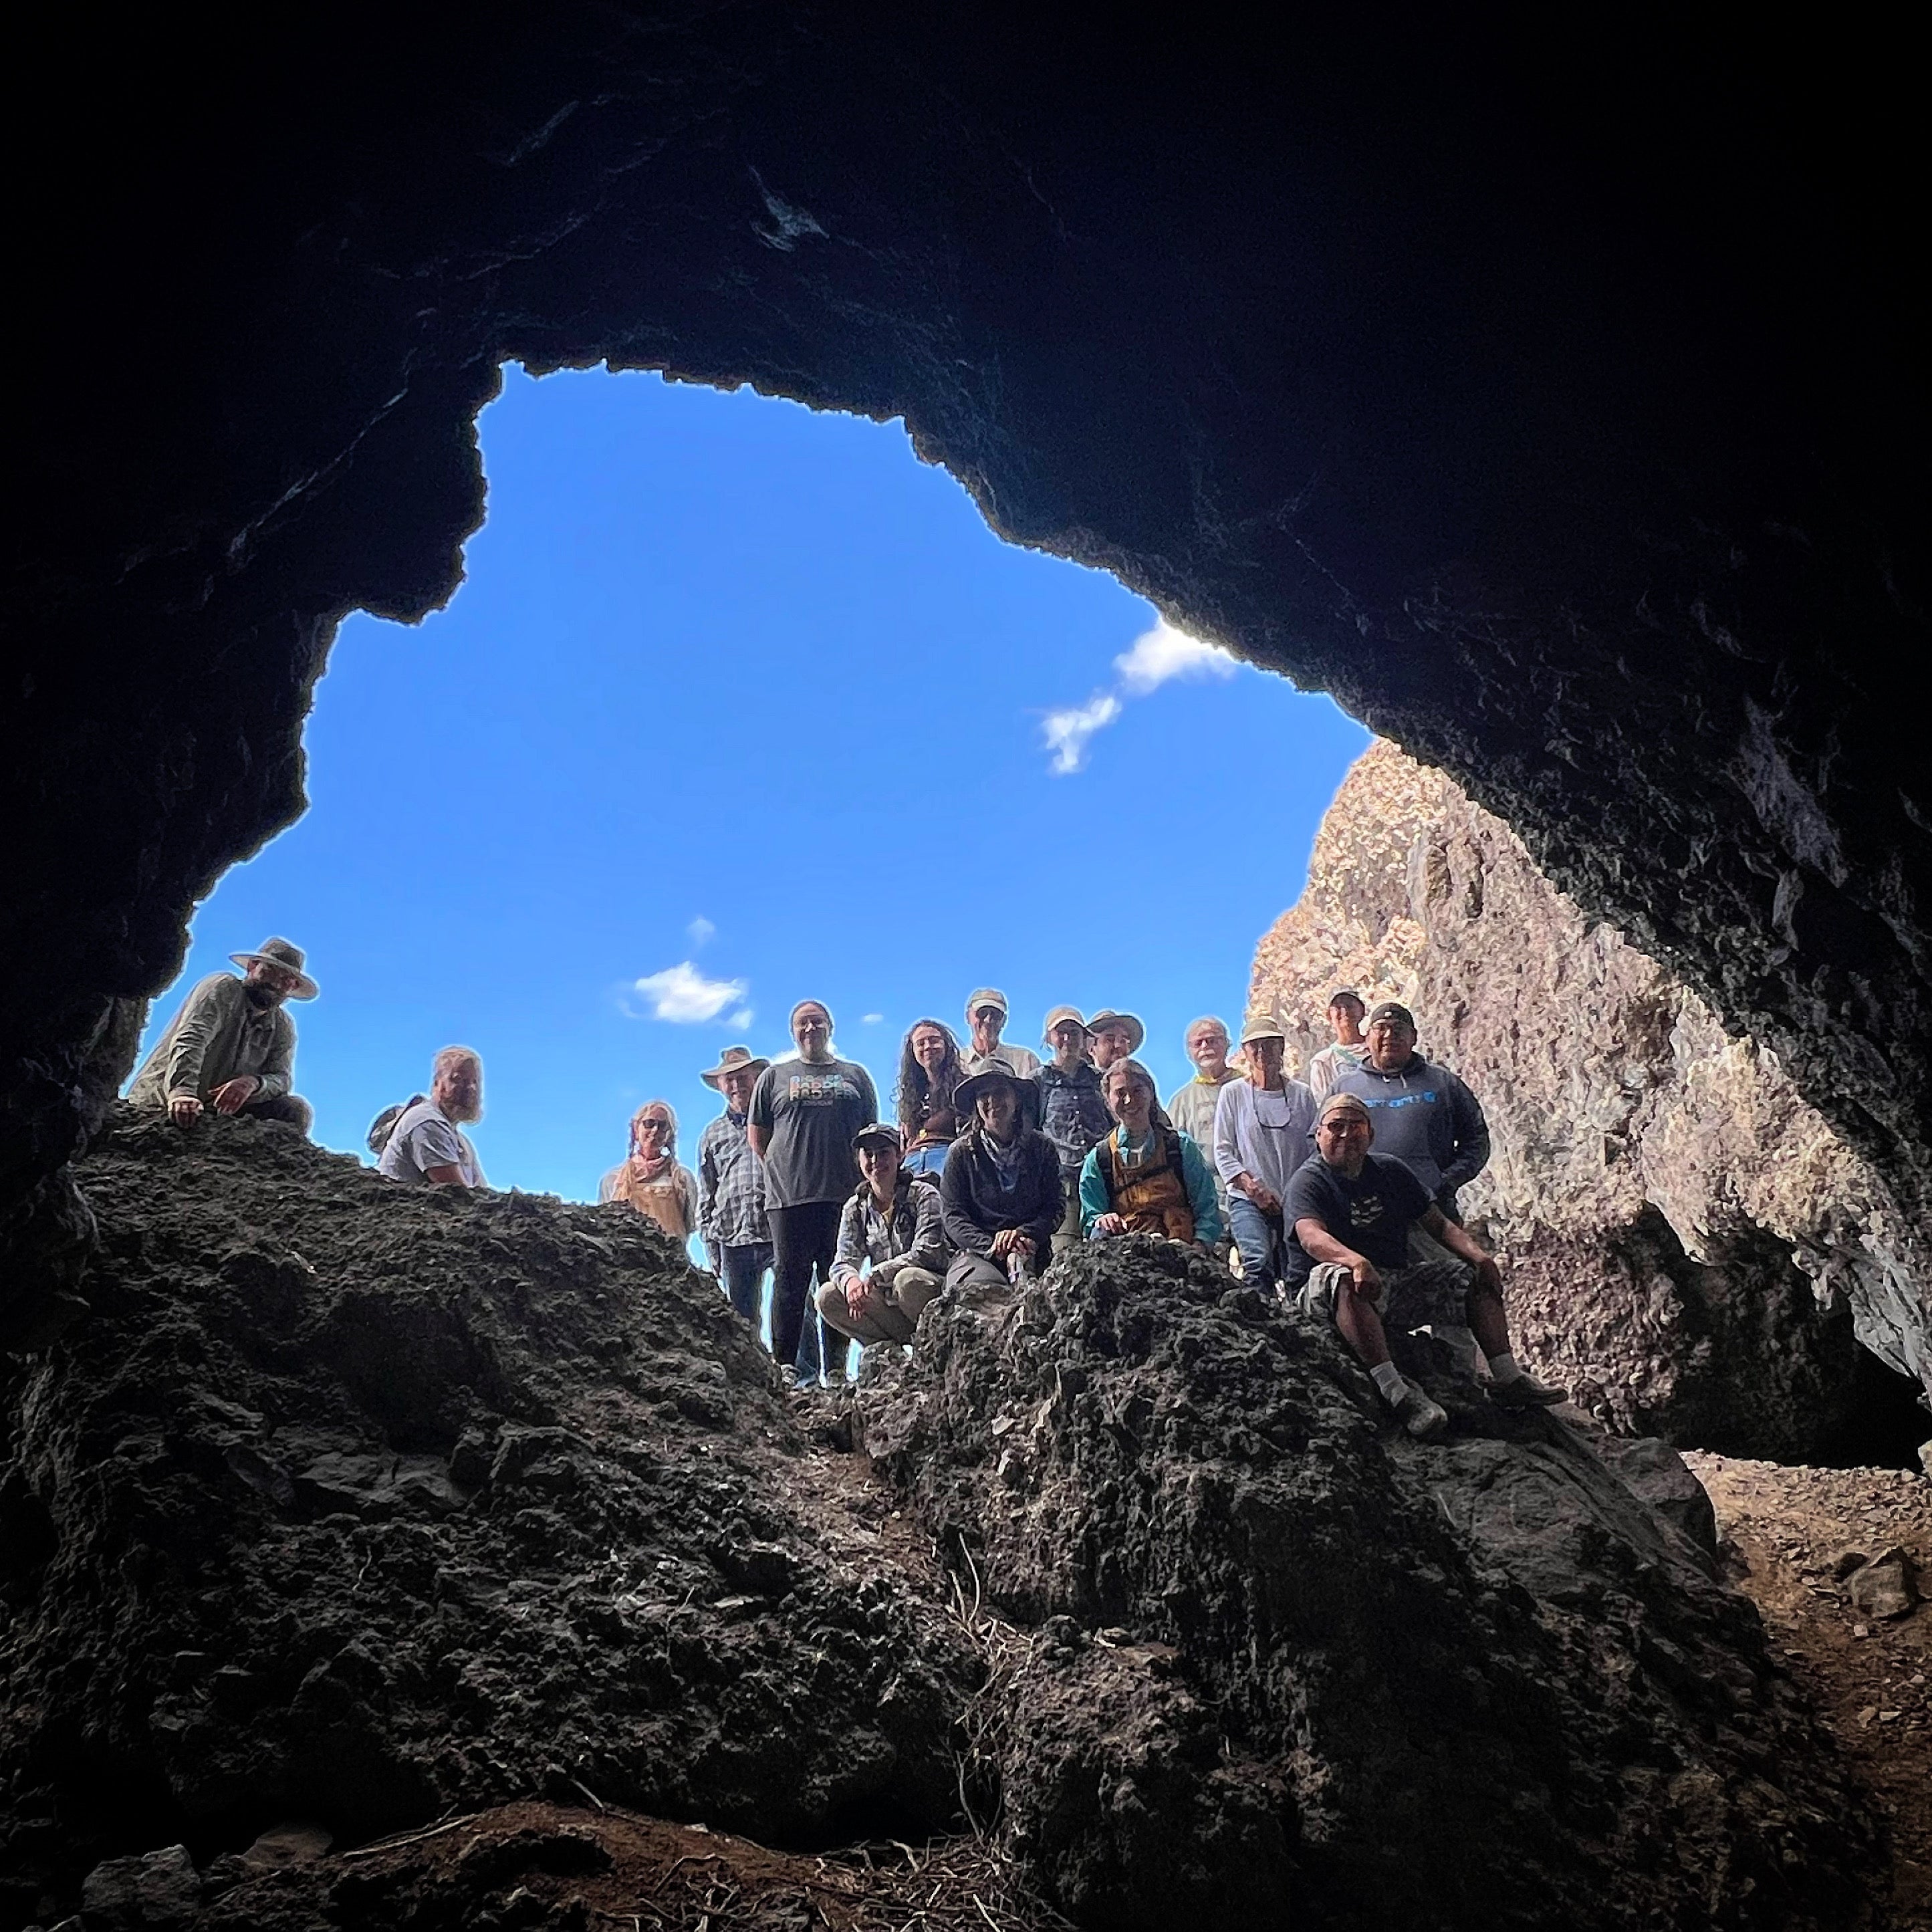 A group of students and staff of field school standing in a cave, largely silhouetted with a blue sky behind.